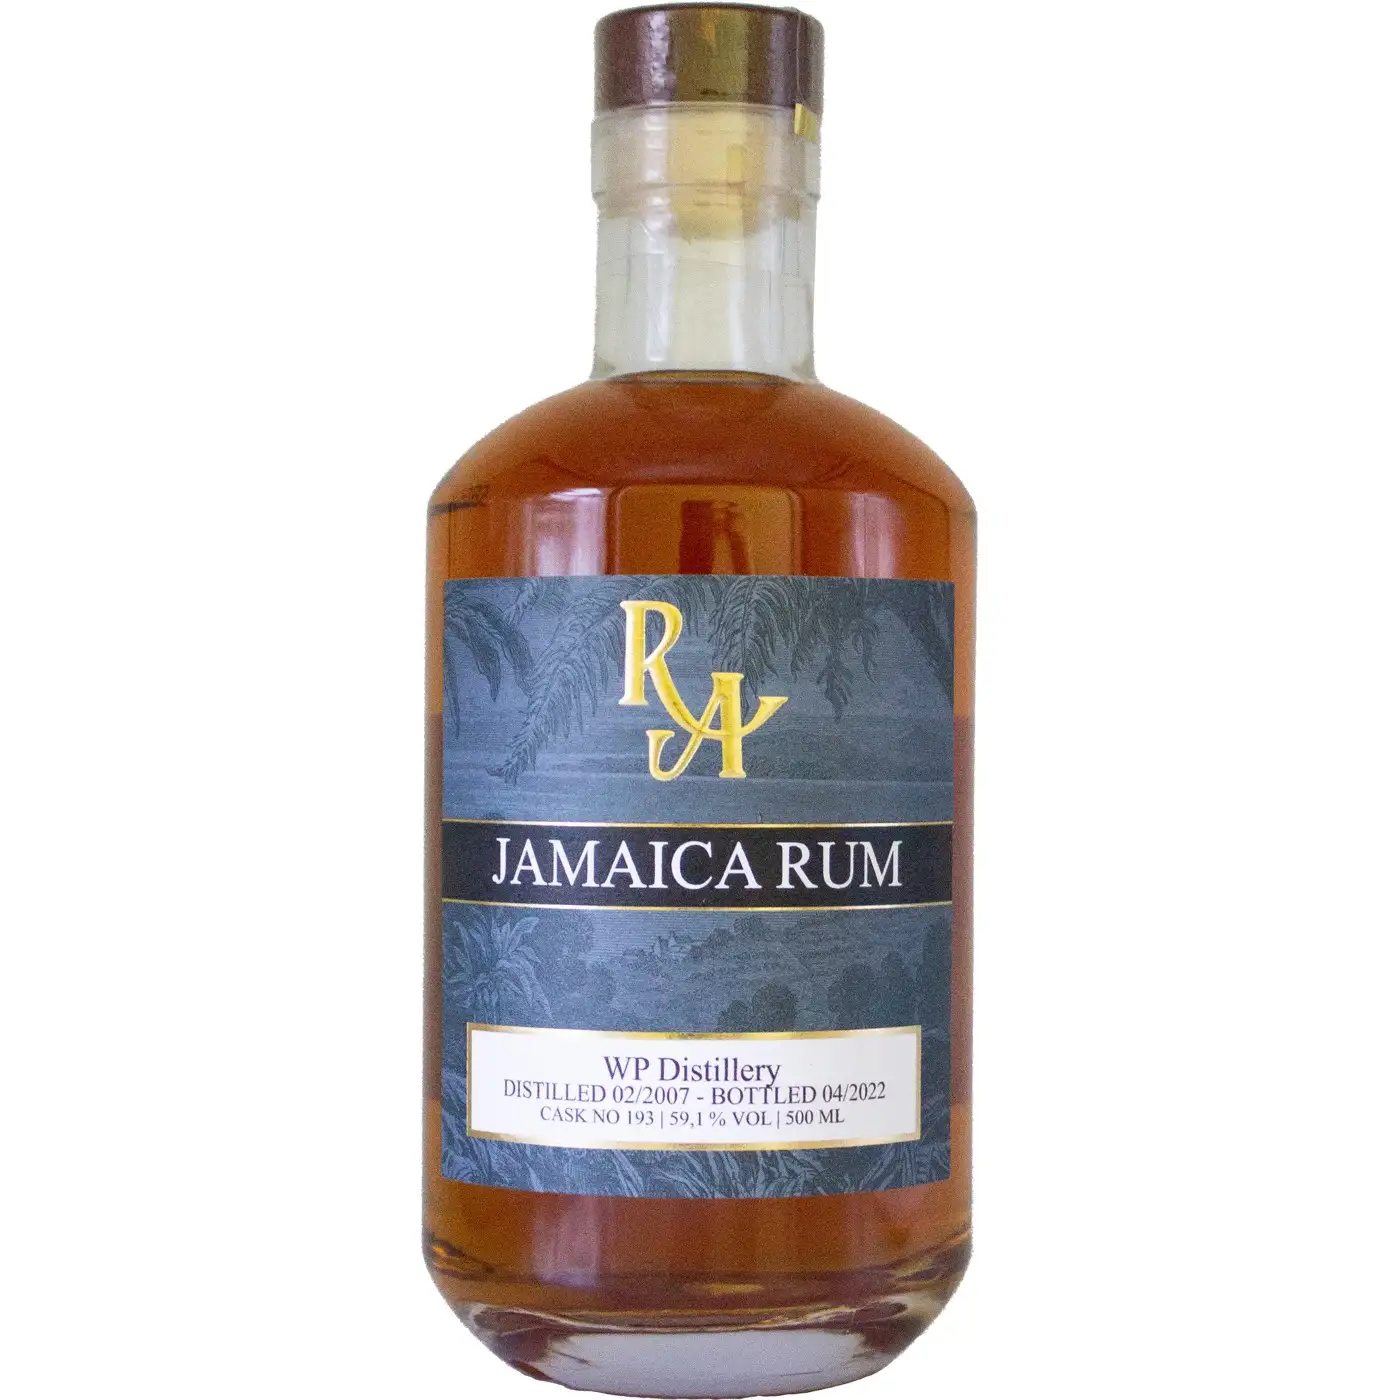 Image of the front of the bottle of the rum Rum Artesanal Jamaica Rum WP